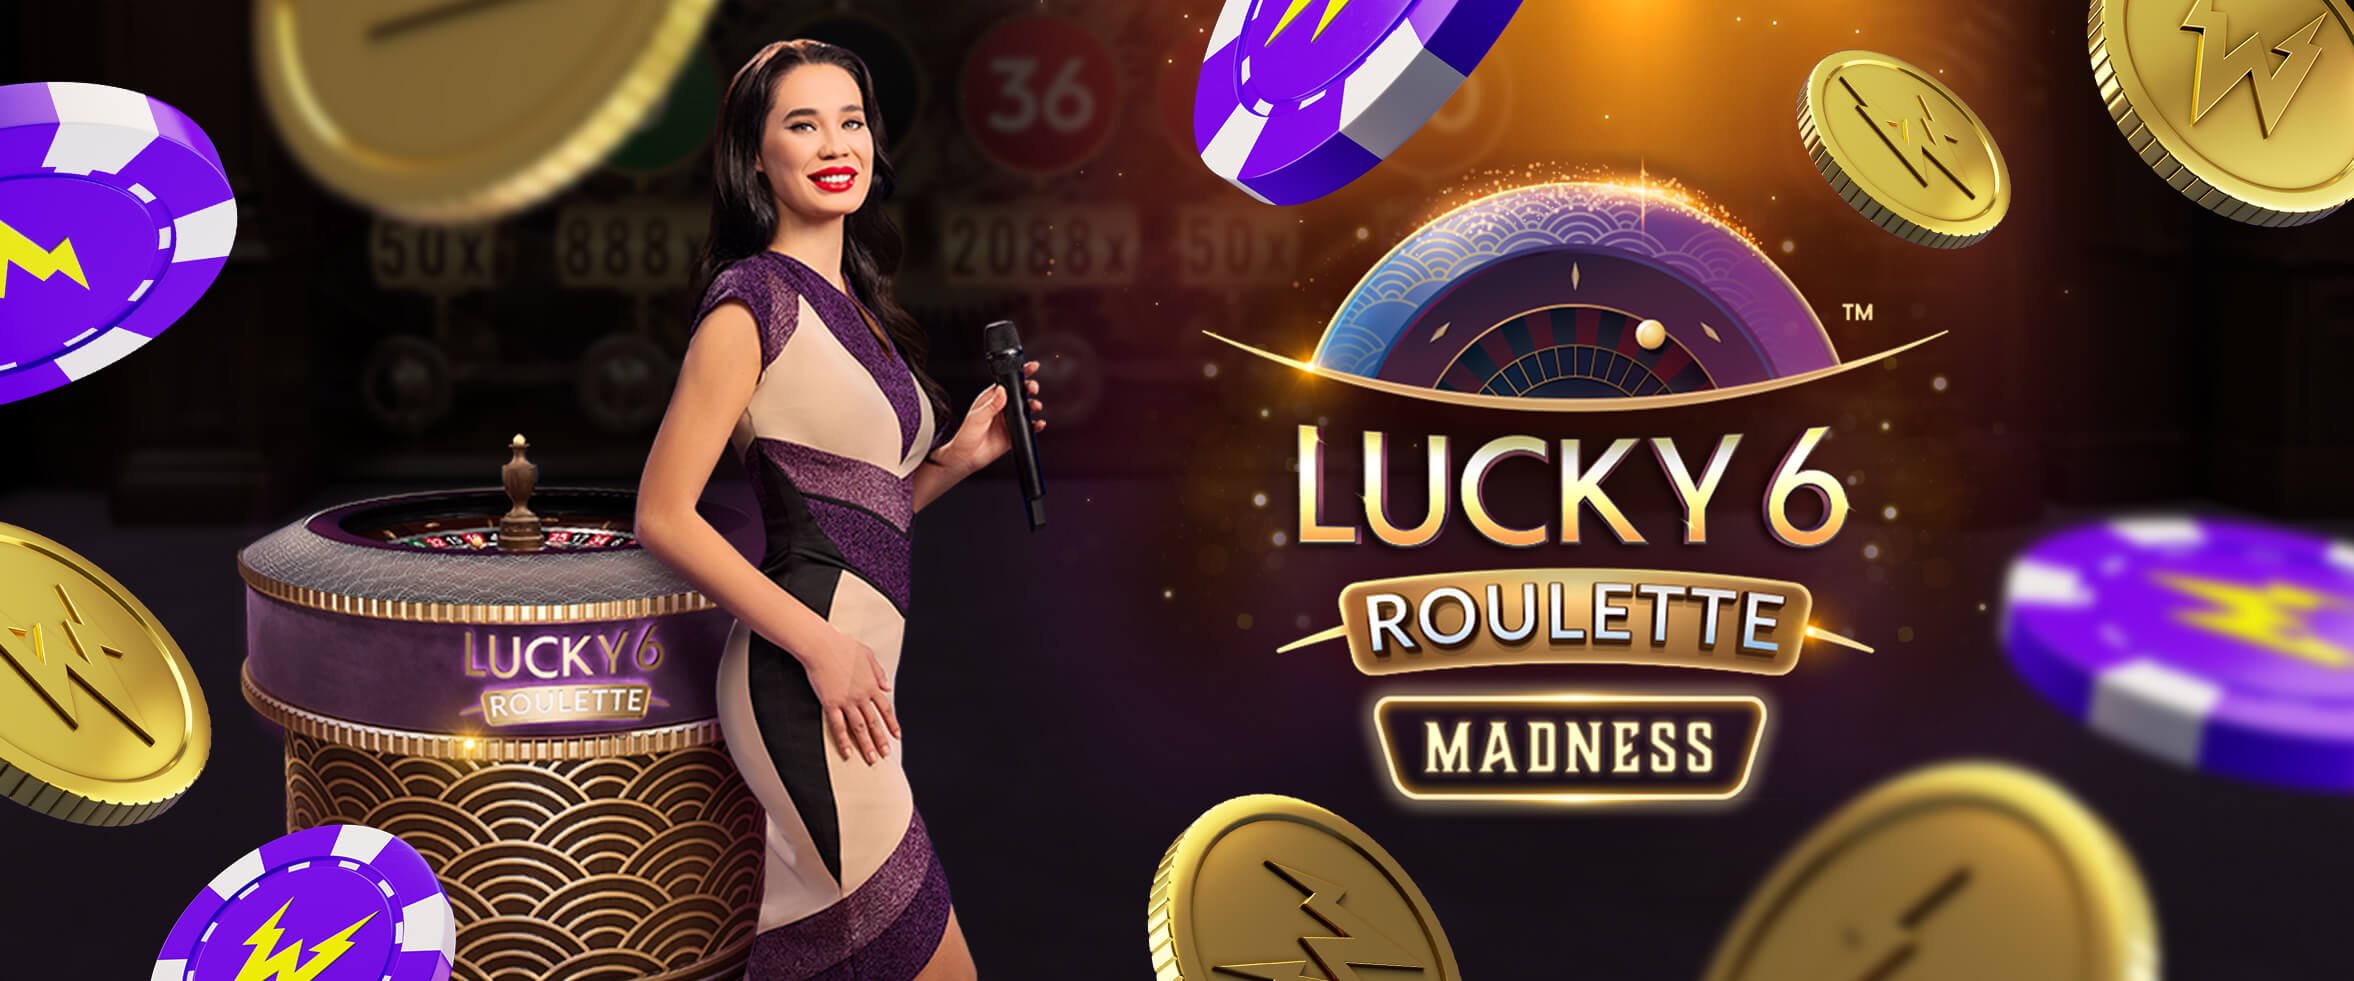 €1 Million Lucky 6 Roulette Madness